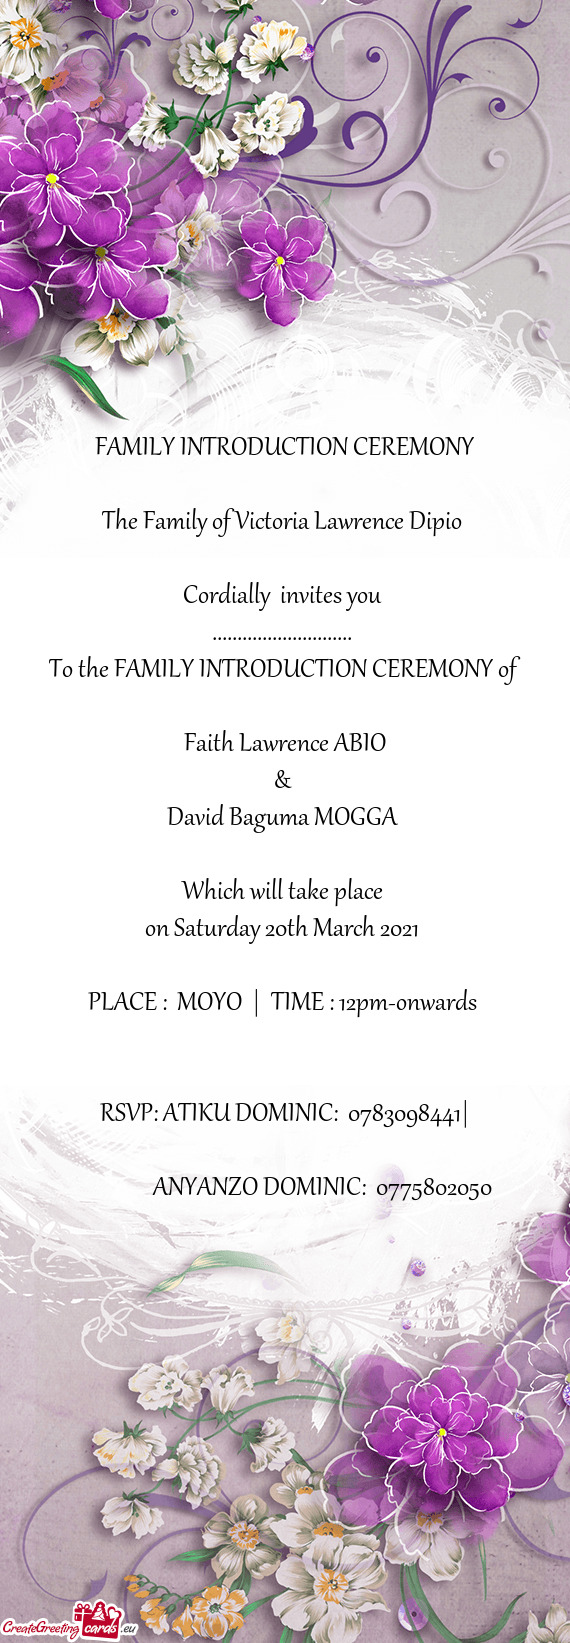 To the FAMILY INTRODUCTION CEREMONY of